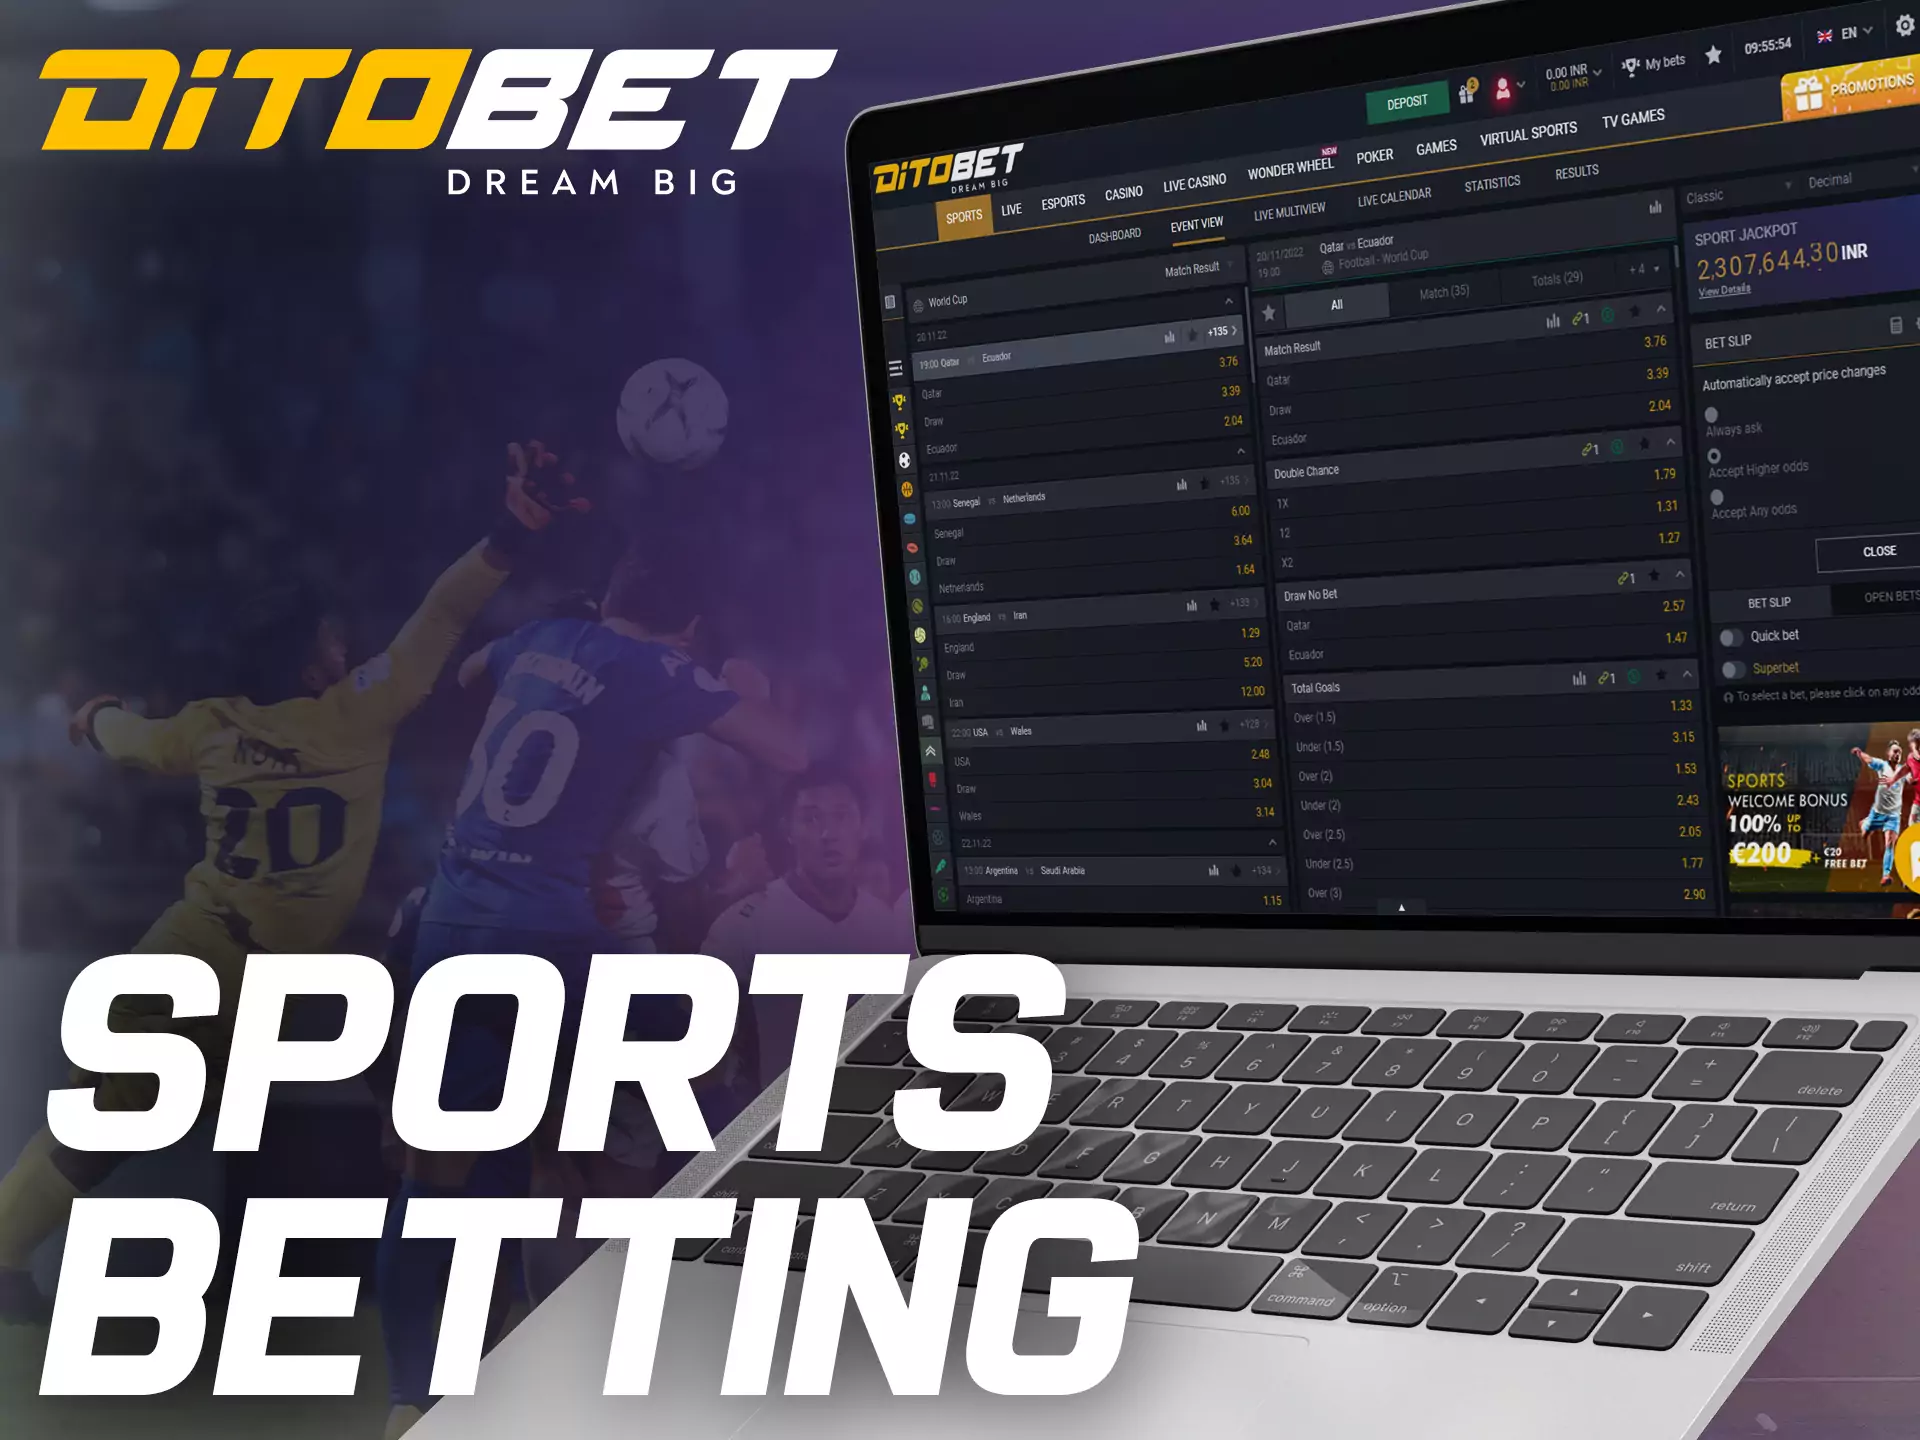 Bet on any sporting events with Ditobet.